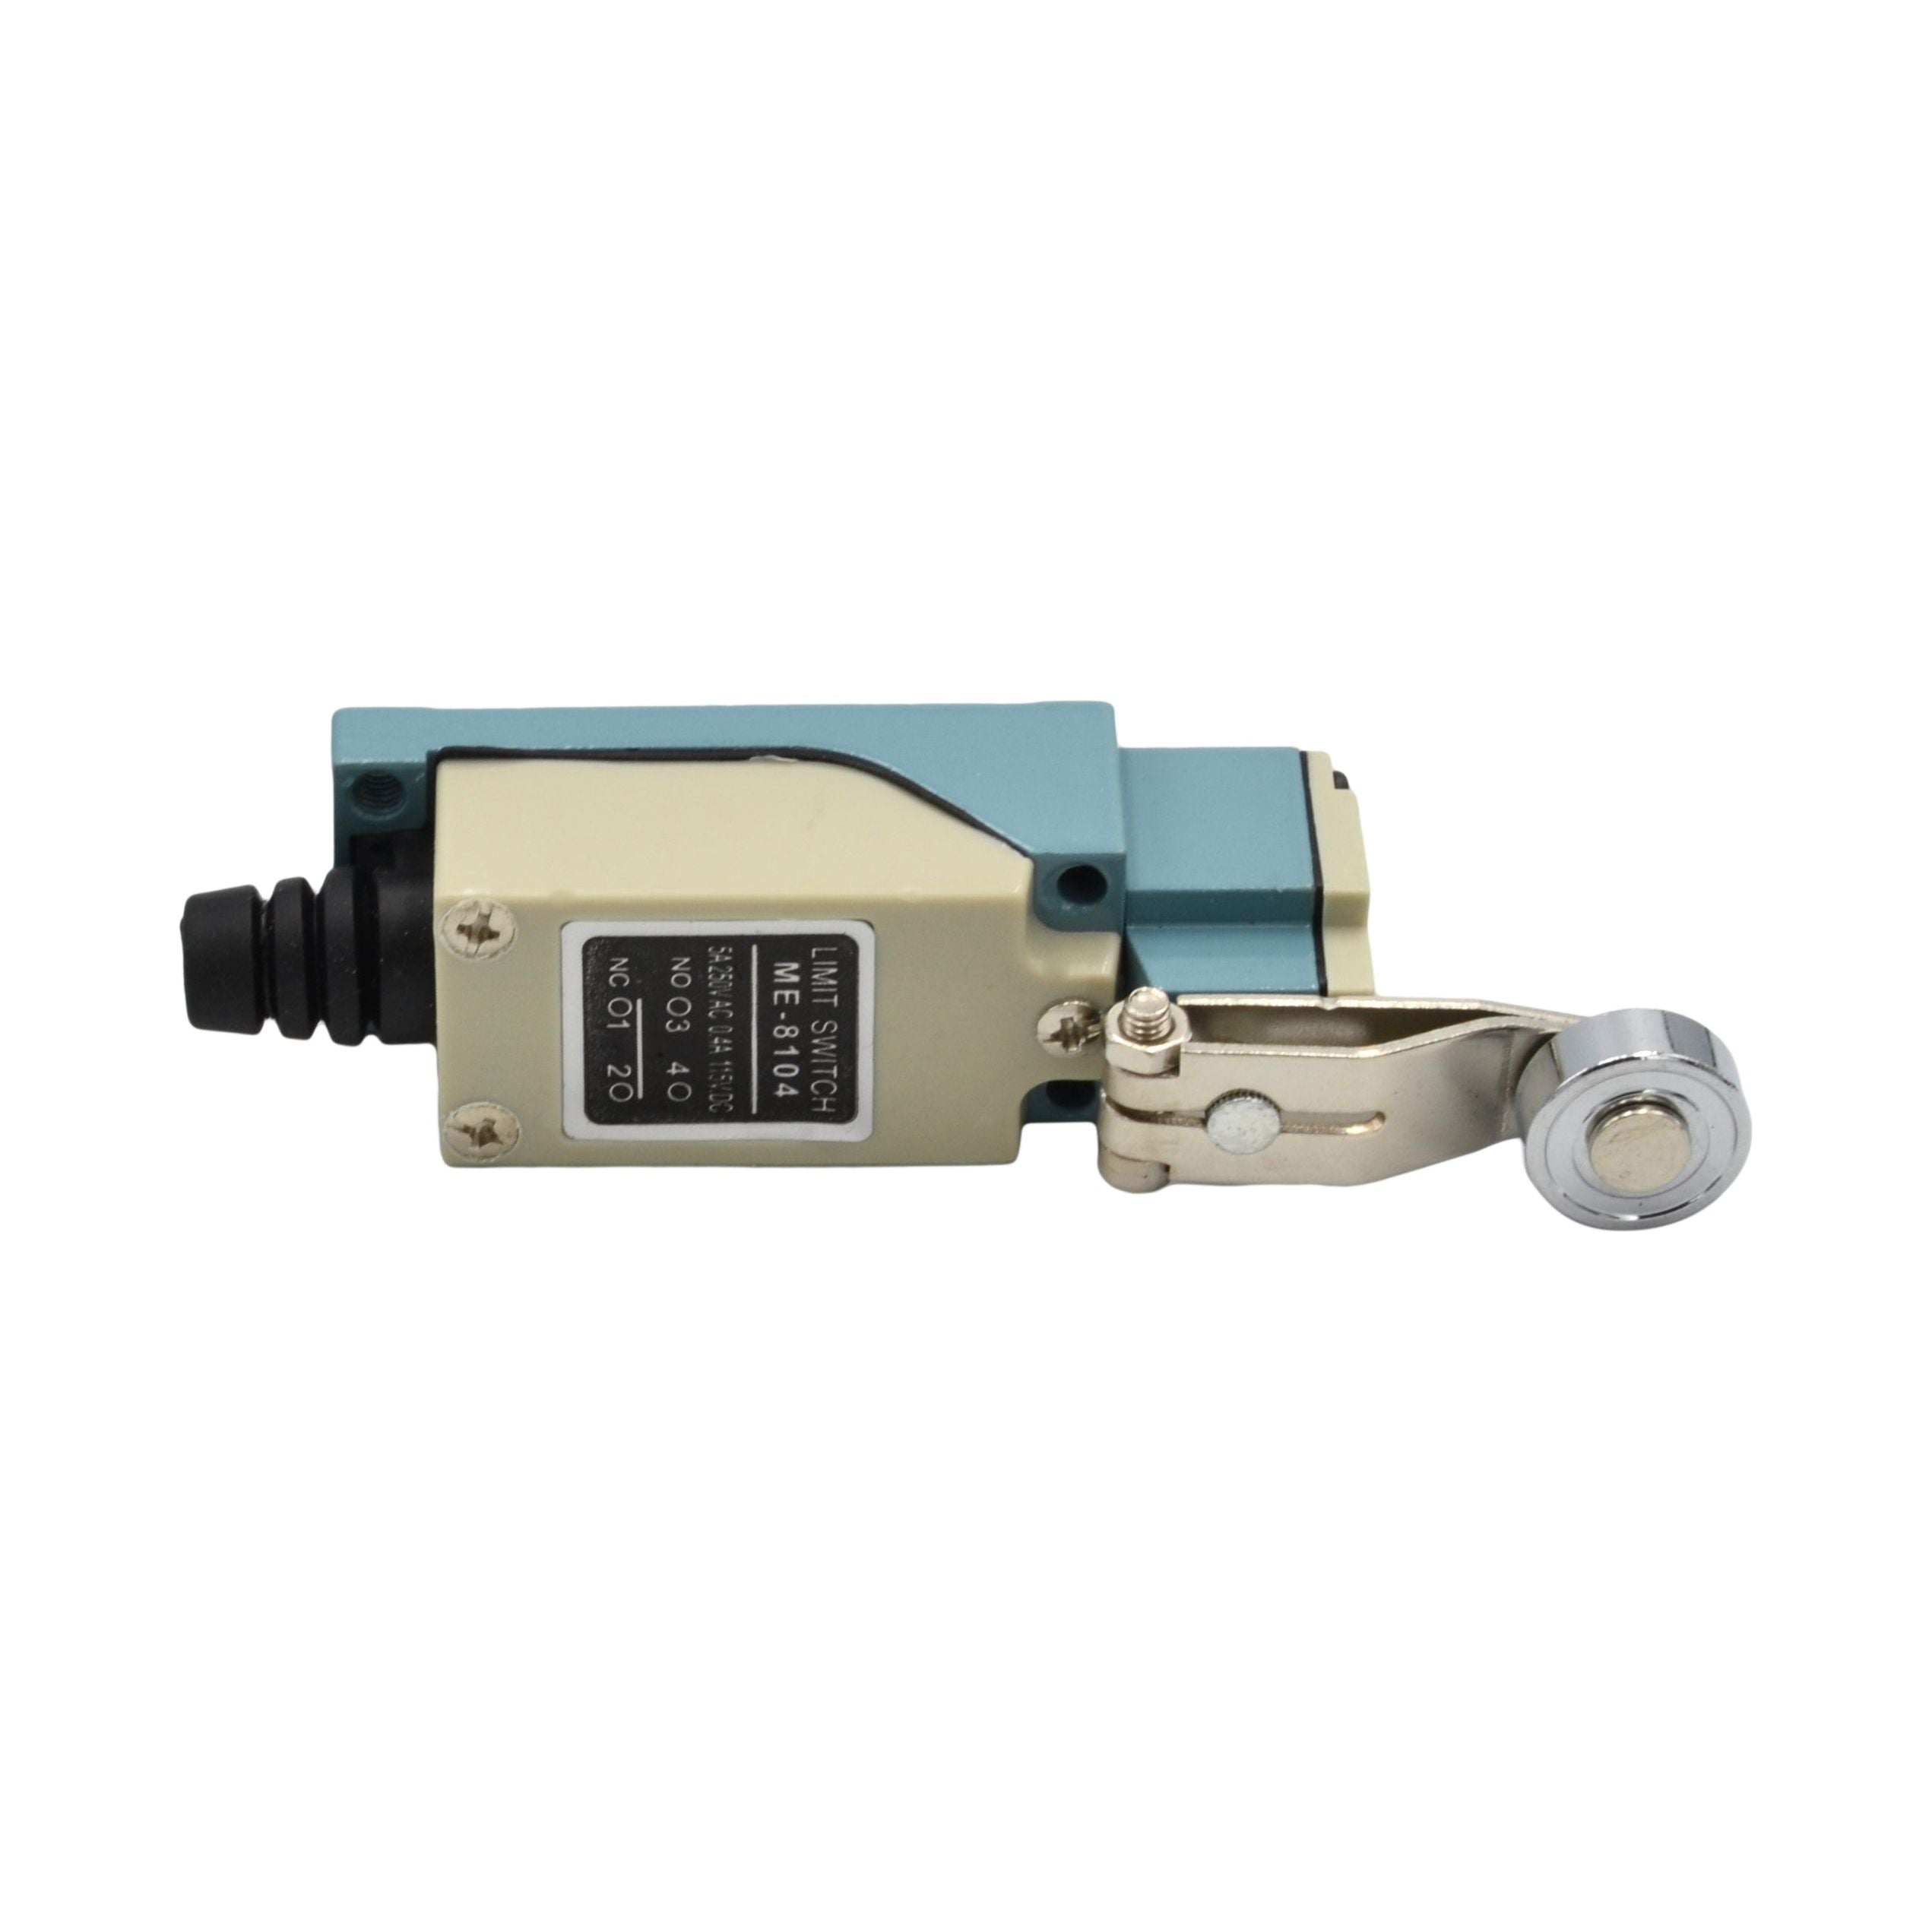 ME-8104 Micro Limit Switch with Adjustable Lever Roller Arm